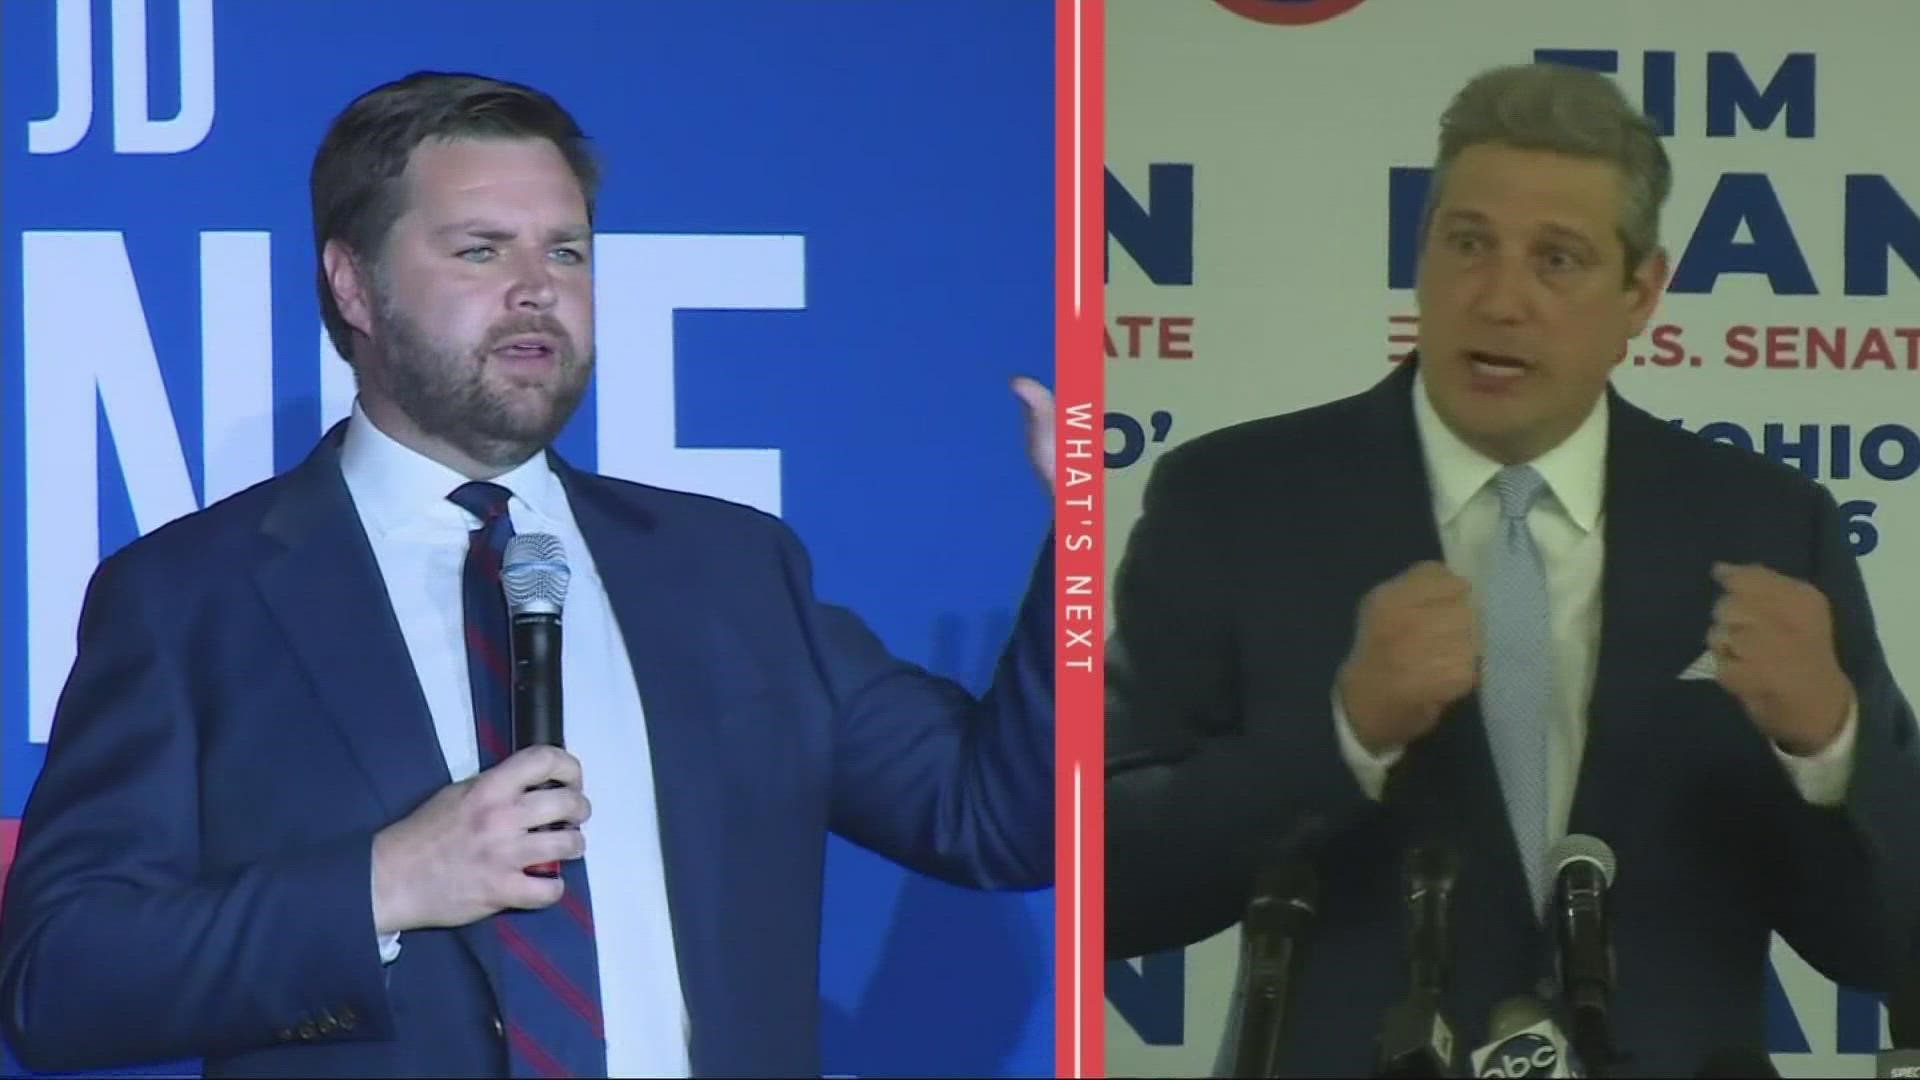 On Tuesday night in Columbus, Tim Ryan and JD Vance appeared on the same stage for the final time as they took part in a town hall event on Fox News.